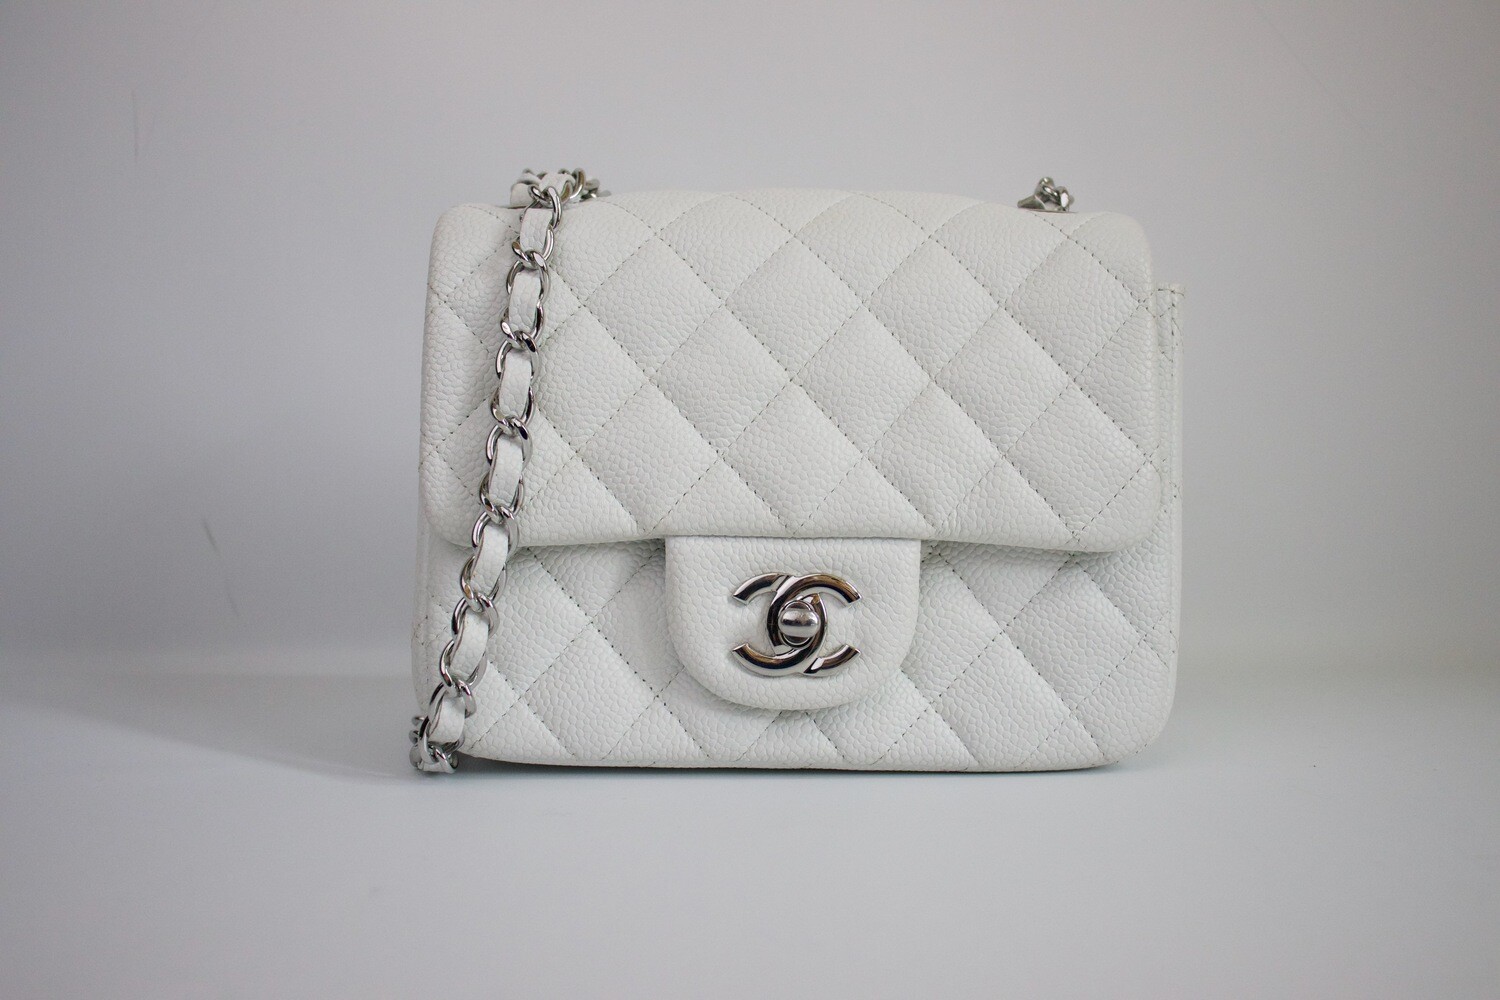 white chanel suitcase